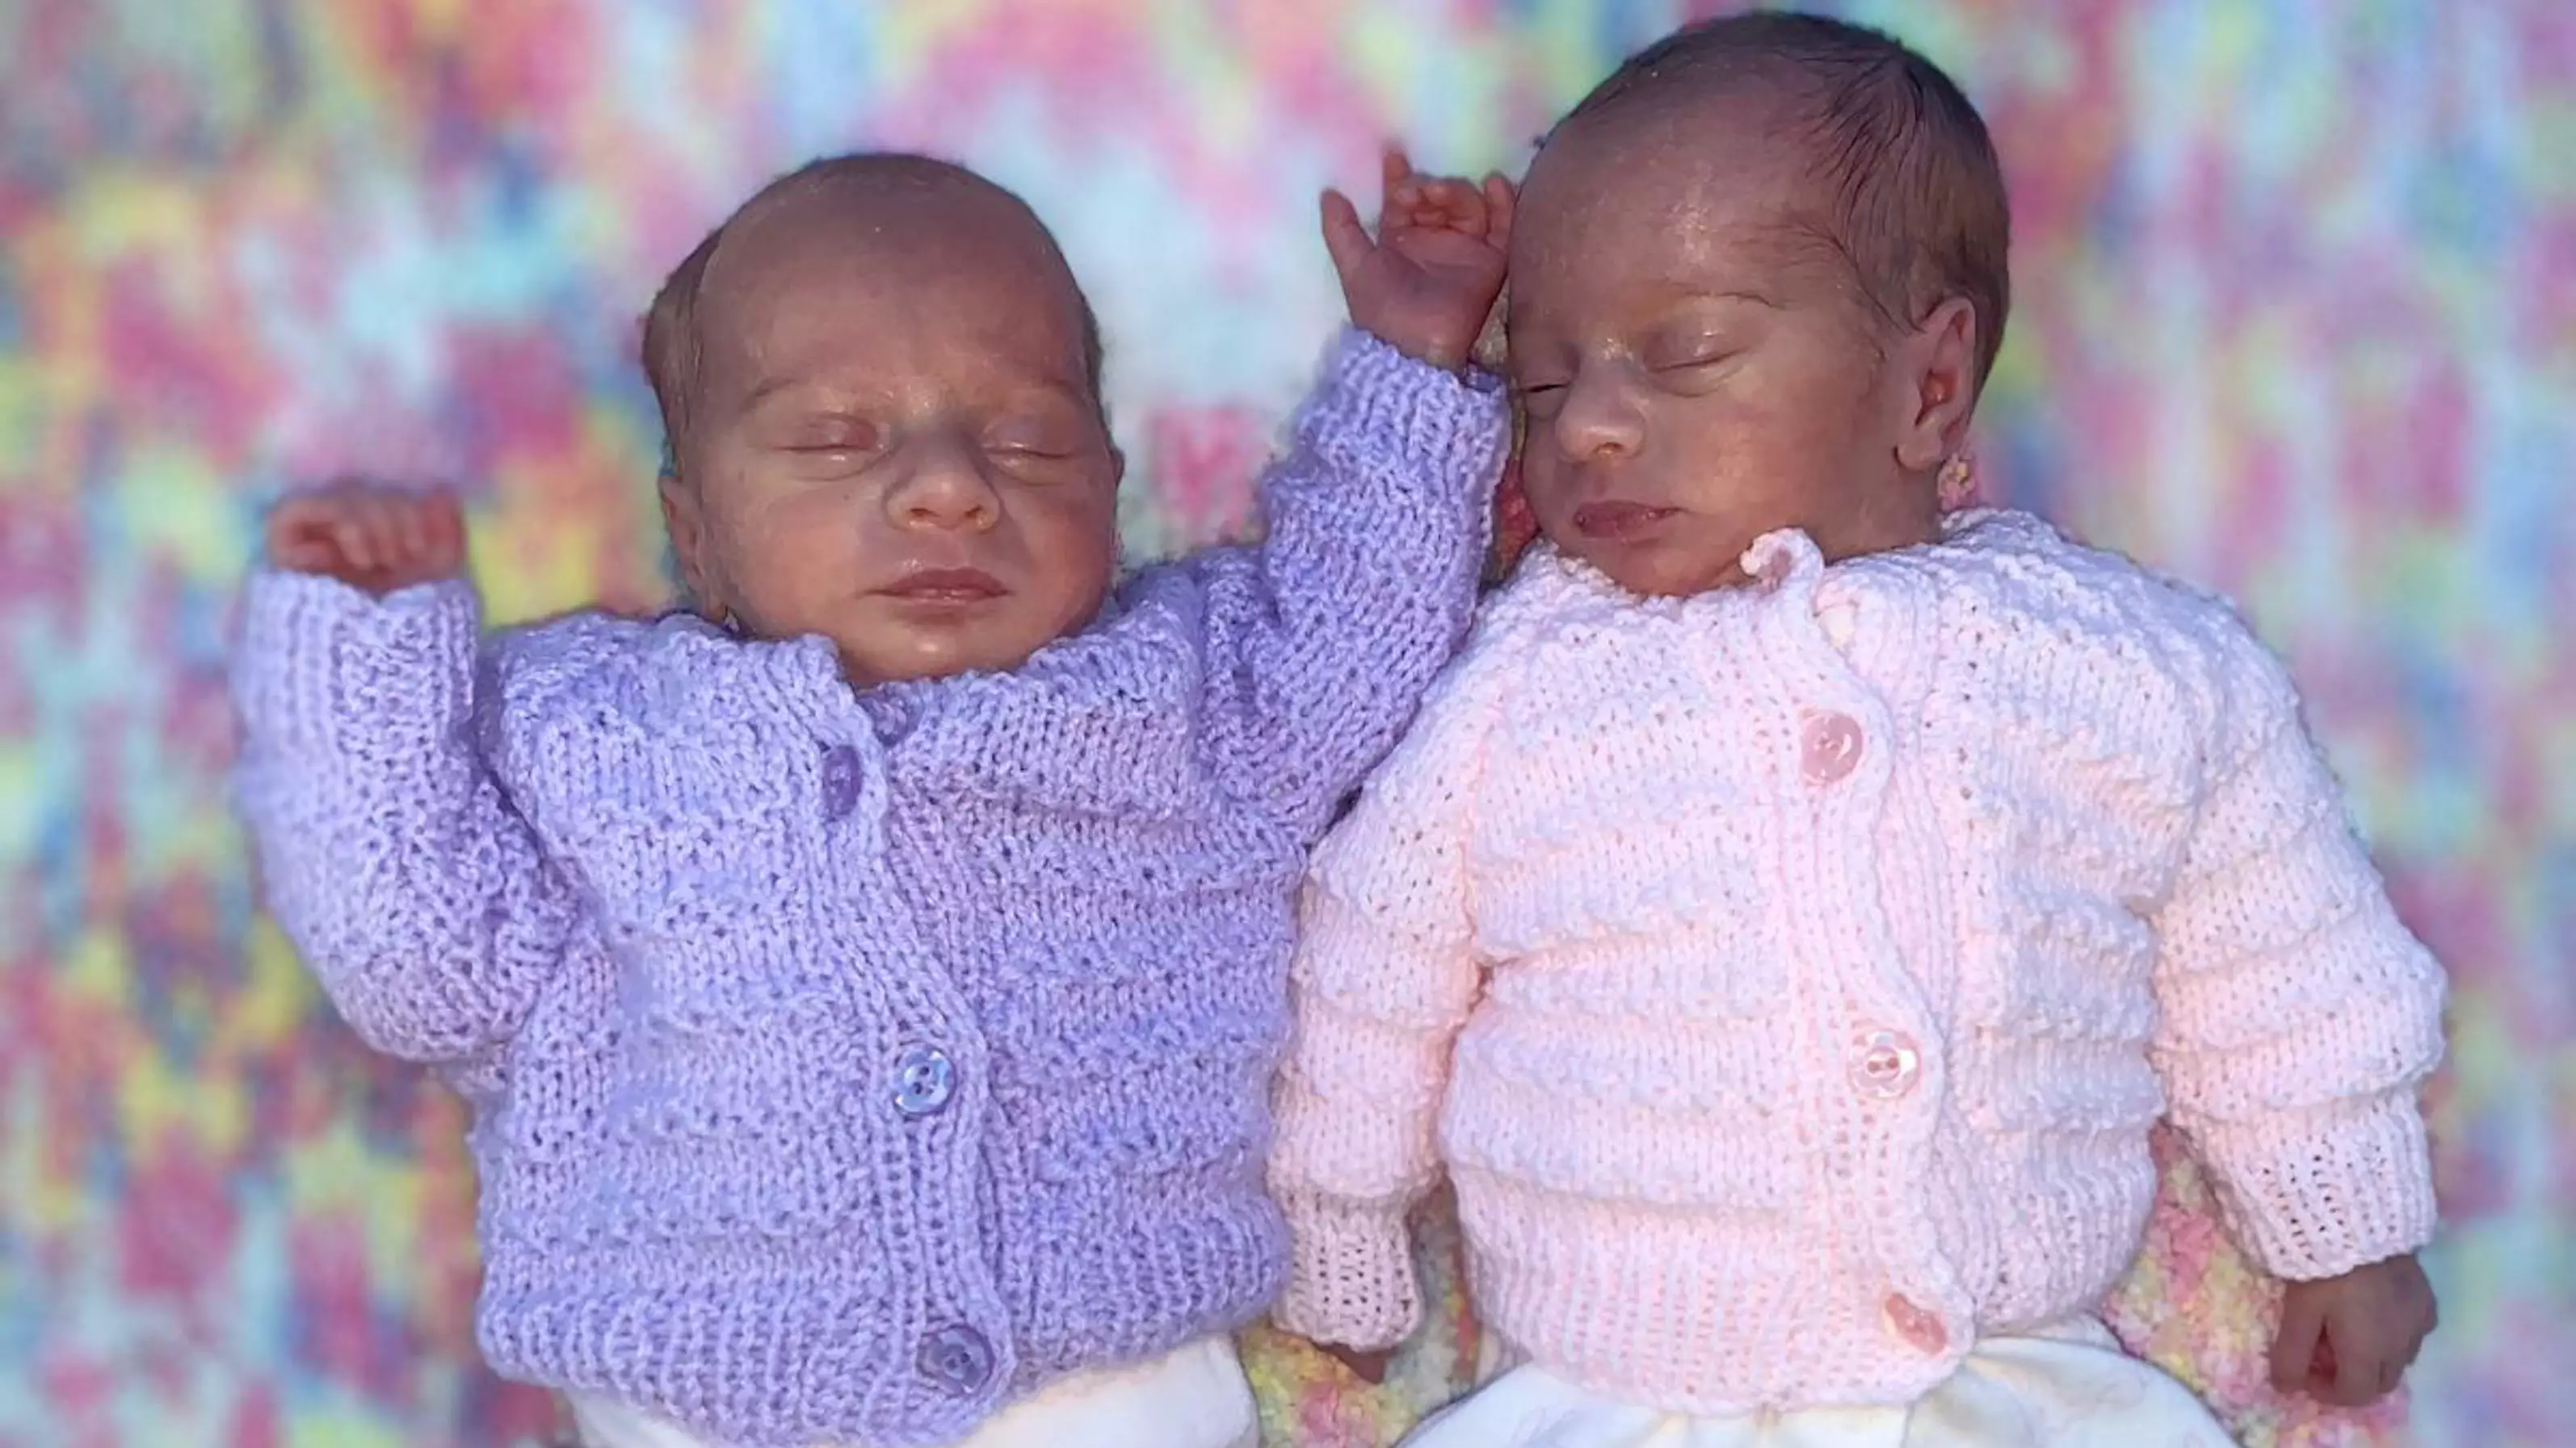 Incredible Moment Premature Twins Were Born Cuddling Each Other